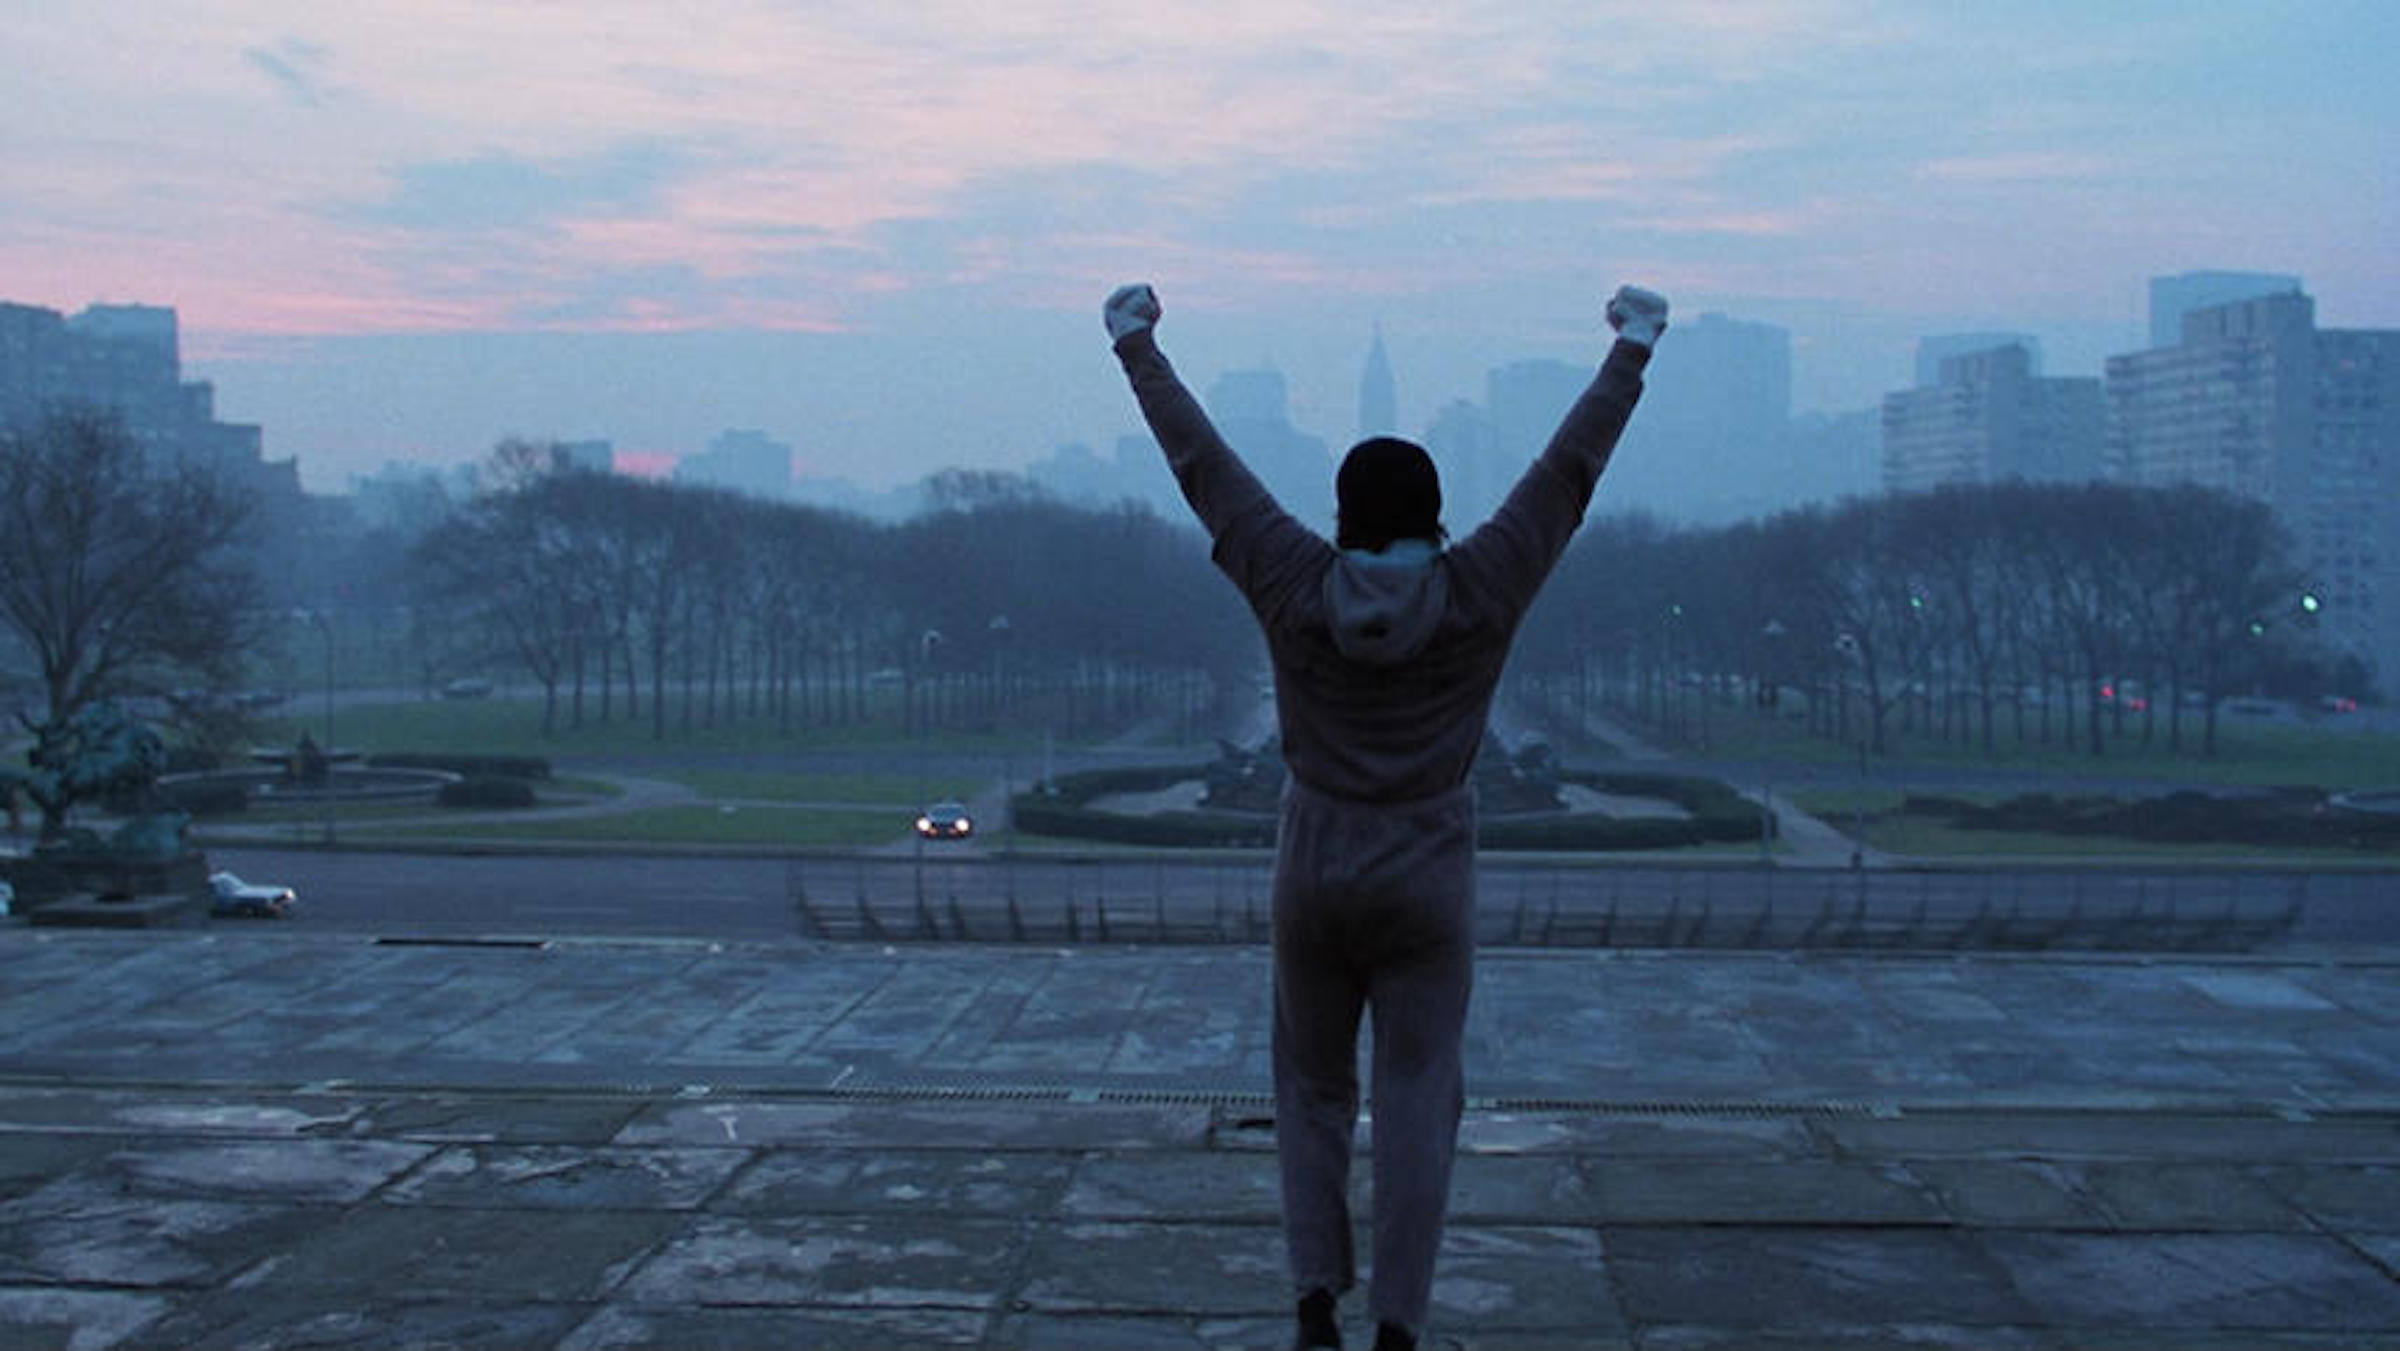 Punching Above Your Weight: How 'I Play Rocky' Makes a Case for Writing Biopics